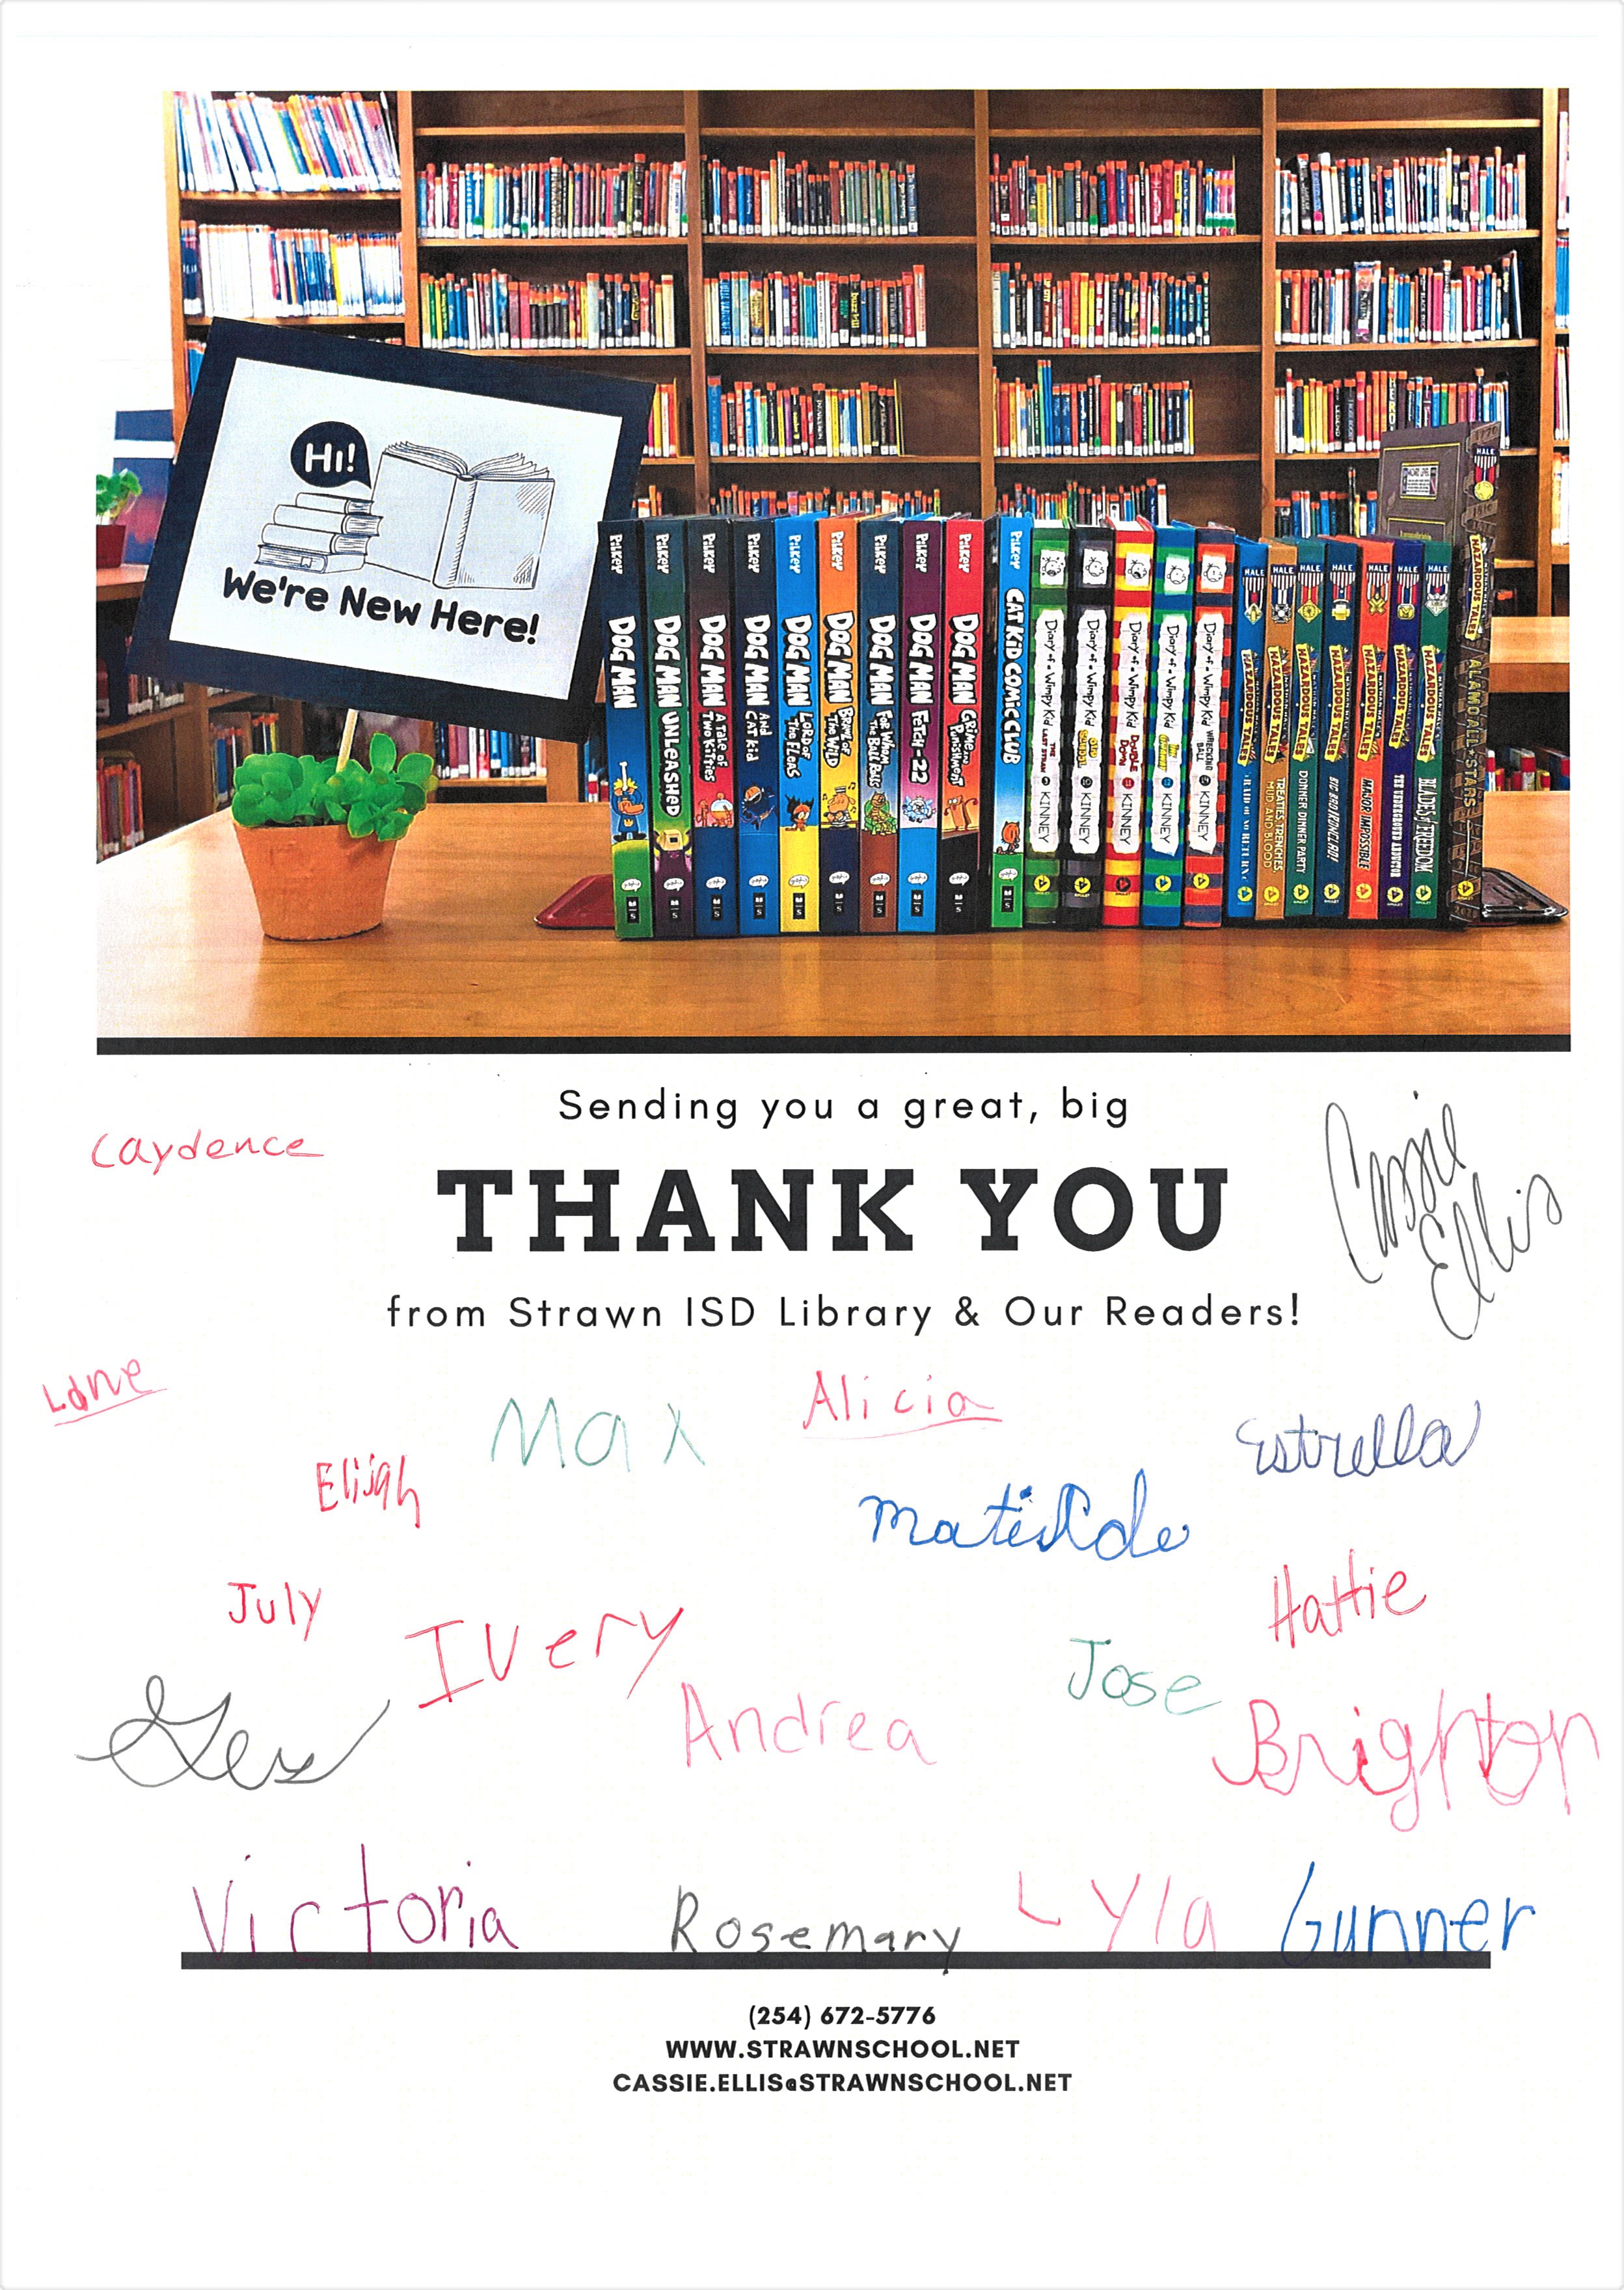 Thank you for our new library books!